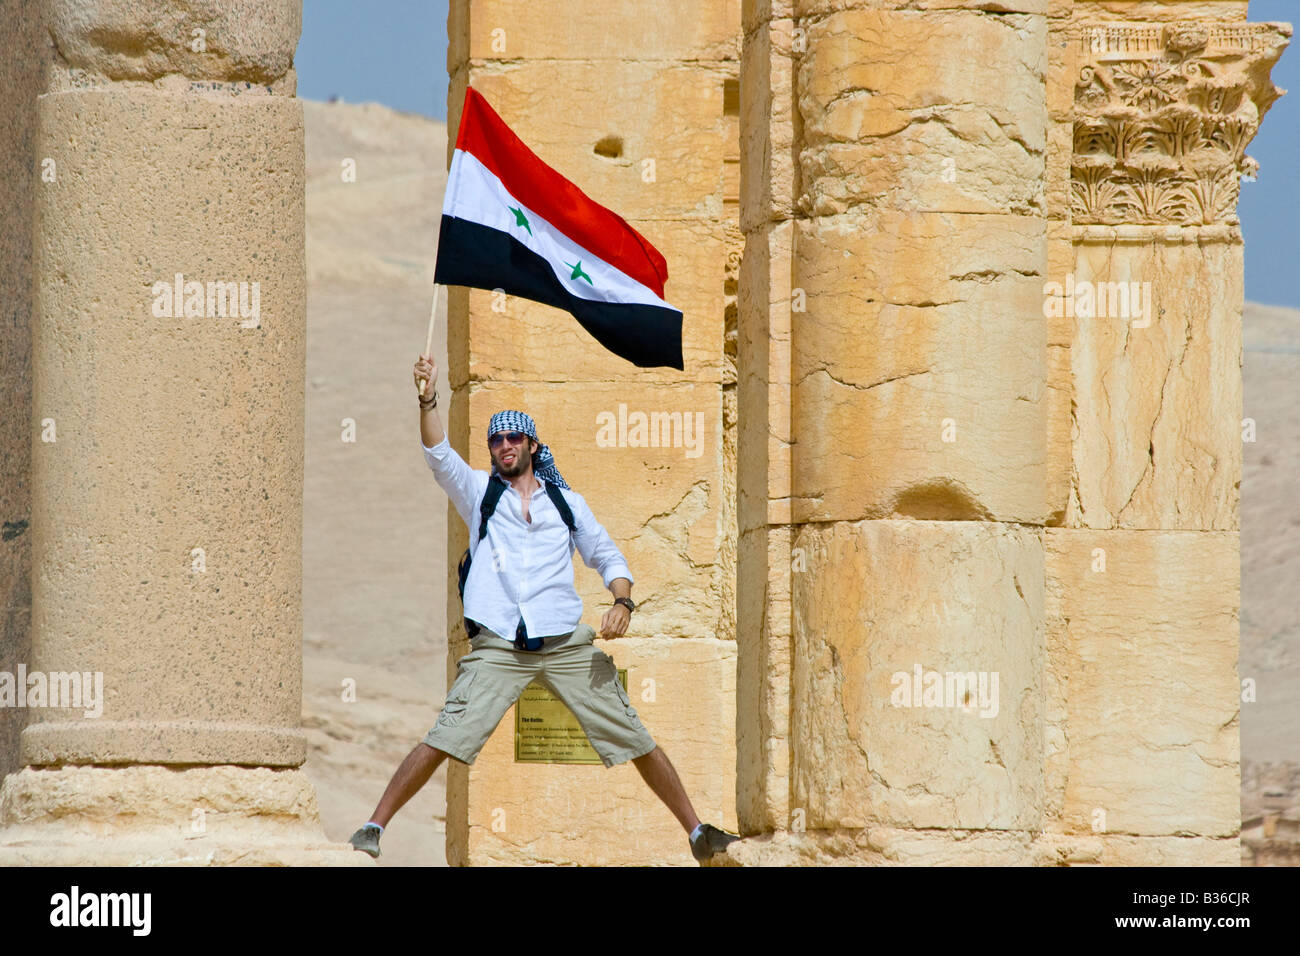 Tourist Waving a Syrian Flag at the Roman Ruins of Palmyra in Syria Stock Photo